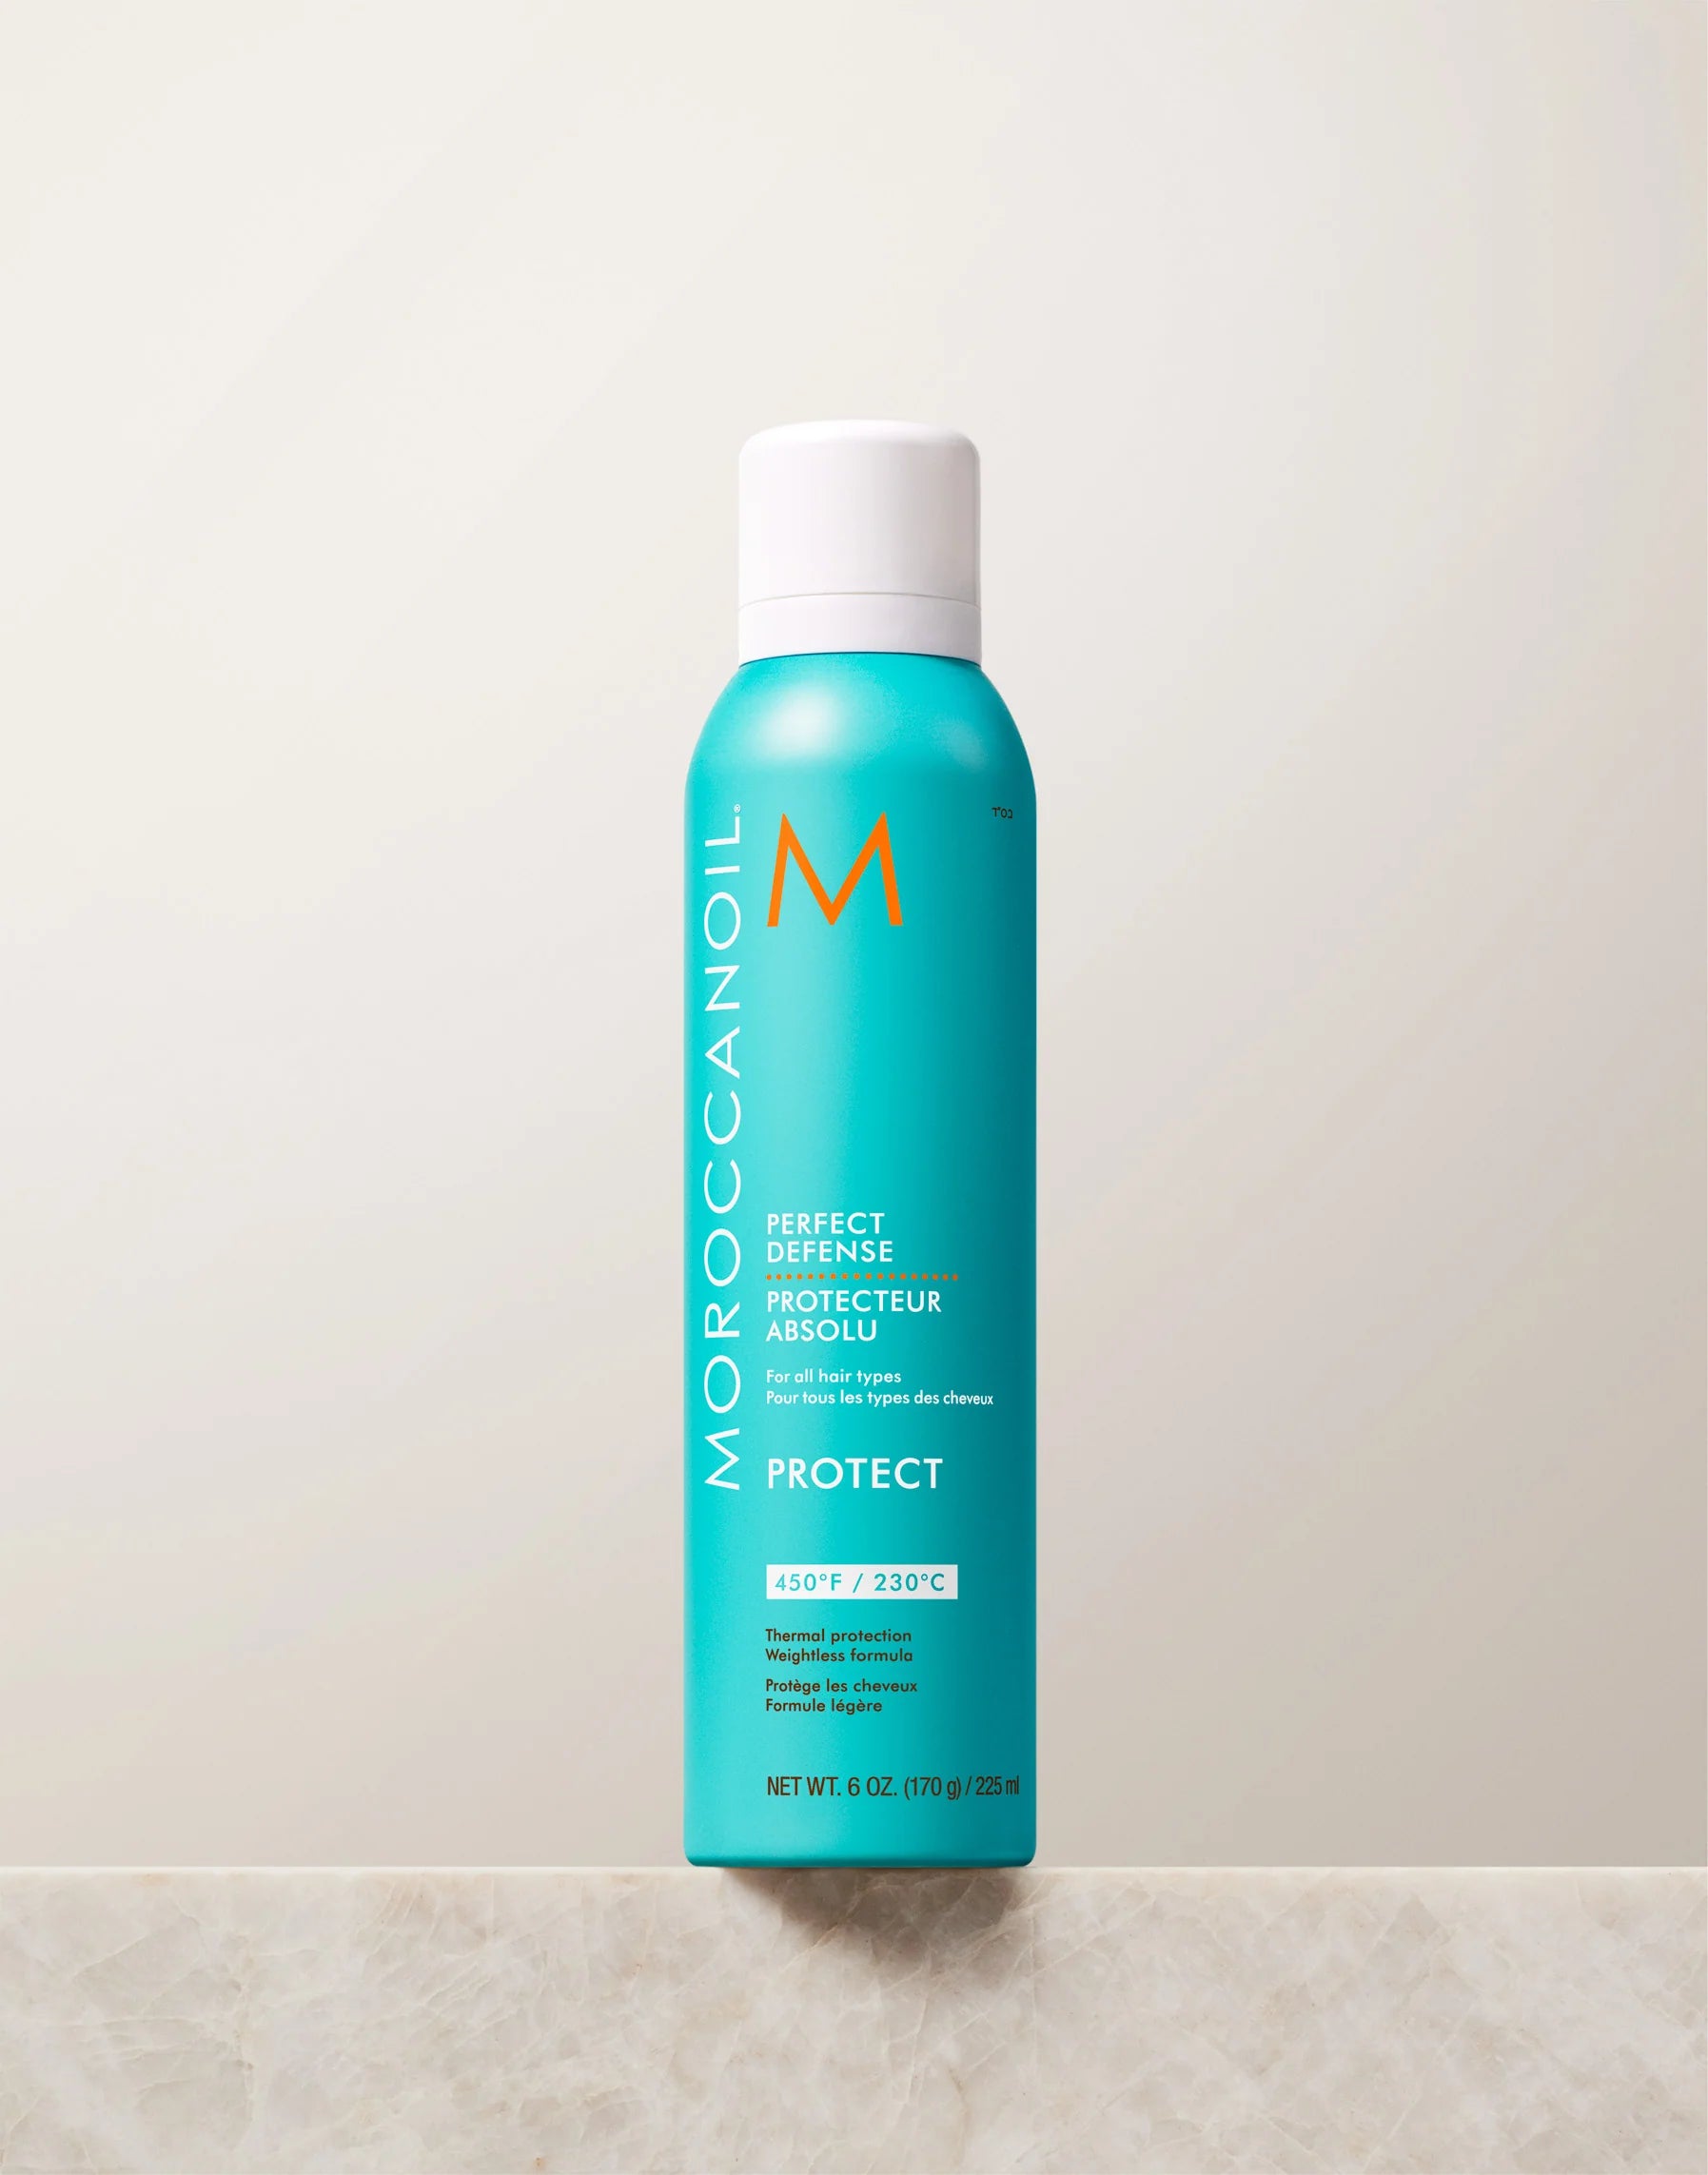 Thermal protection spray (MoroccanOil Perfect Defense Heat Protectant)